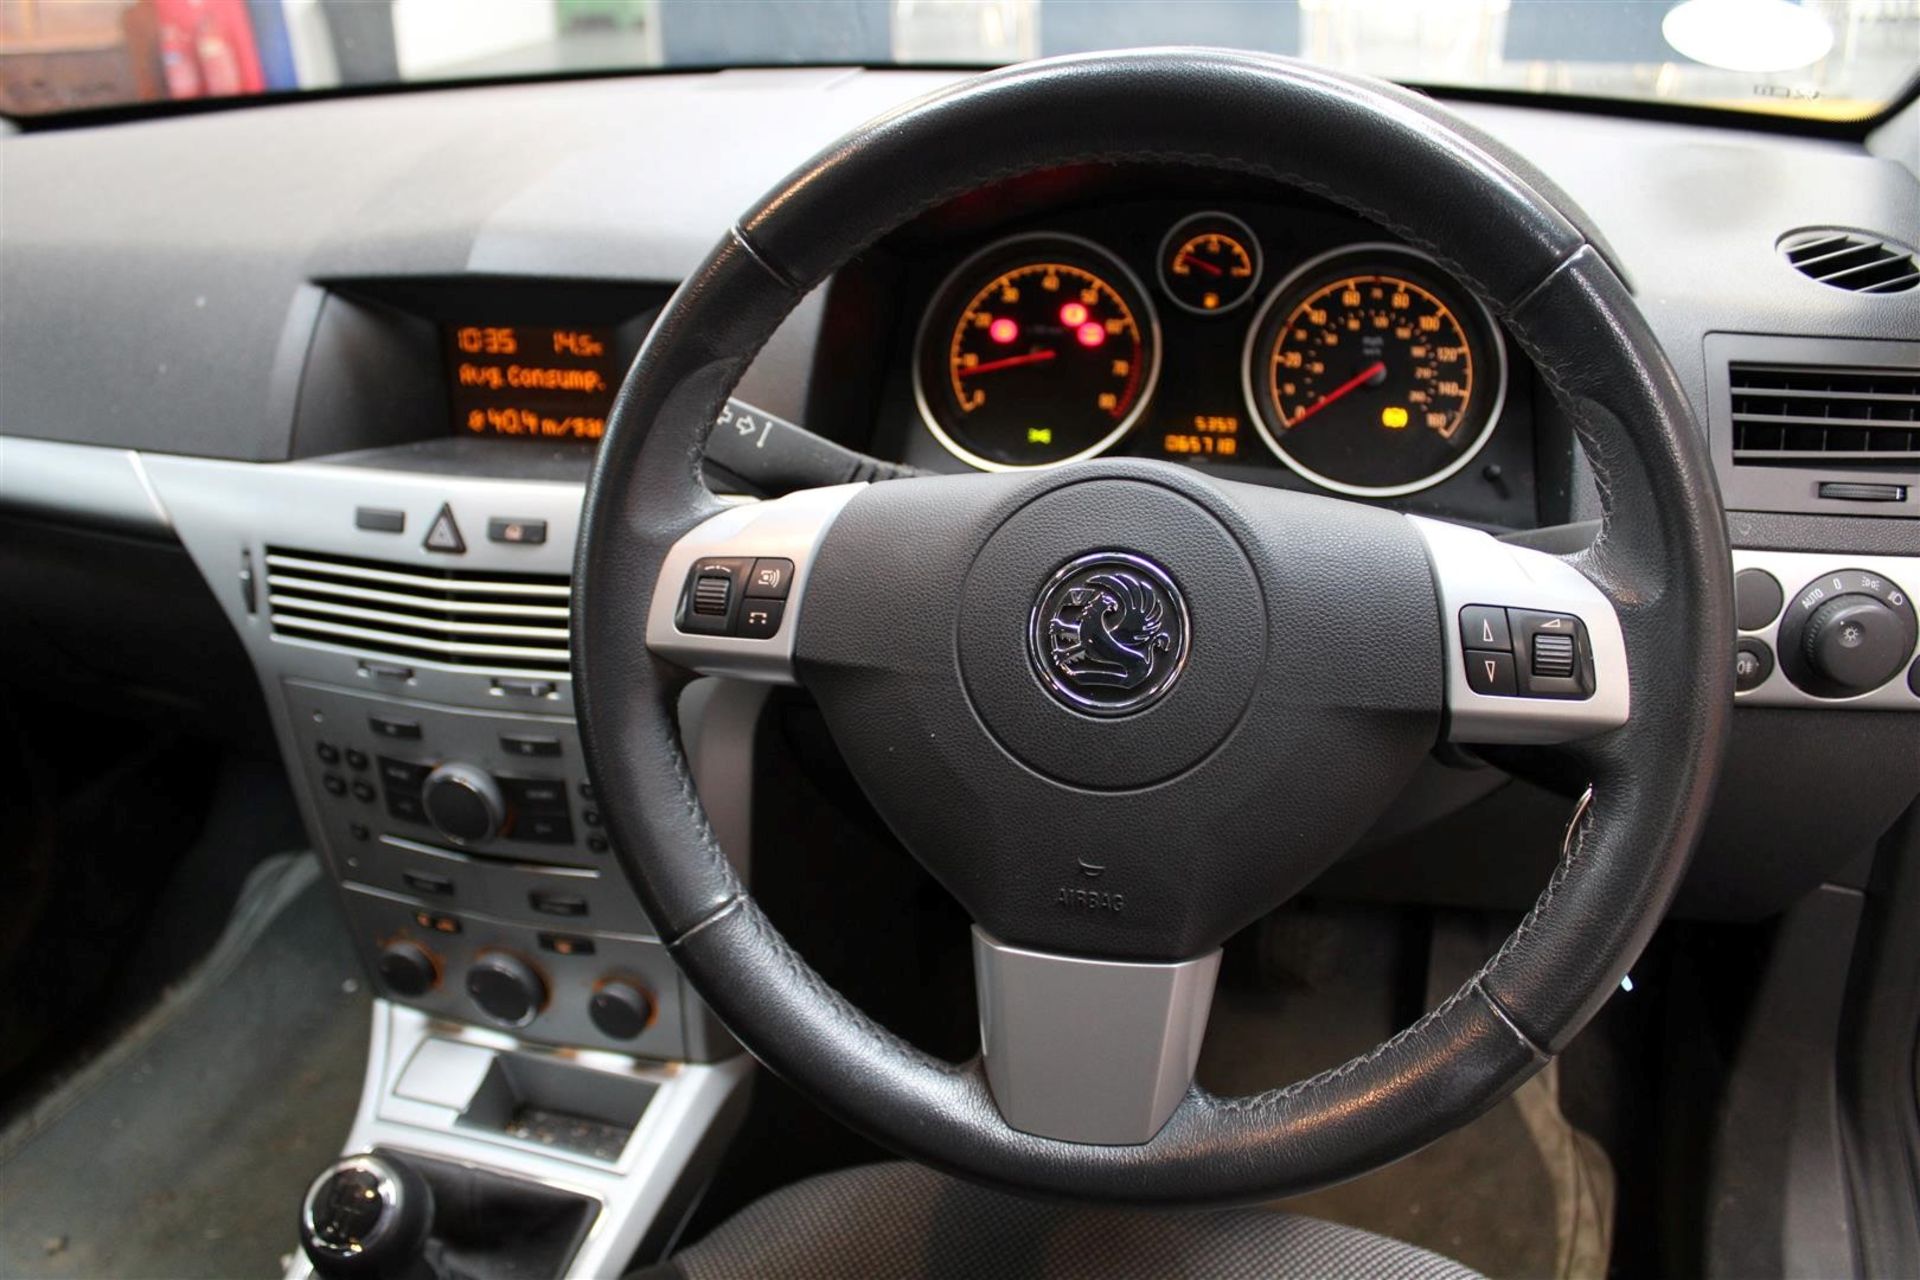 59 09 Vauxhall Astra Active - Image 10 of 27